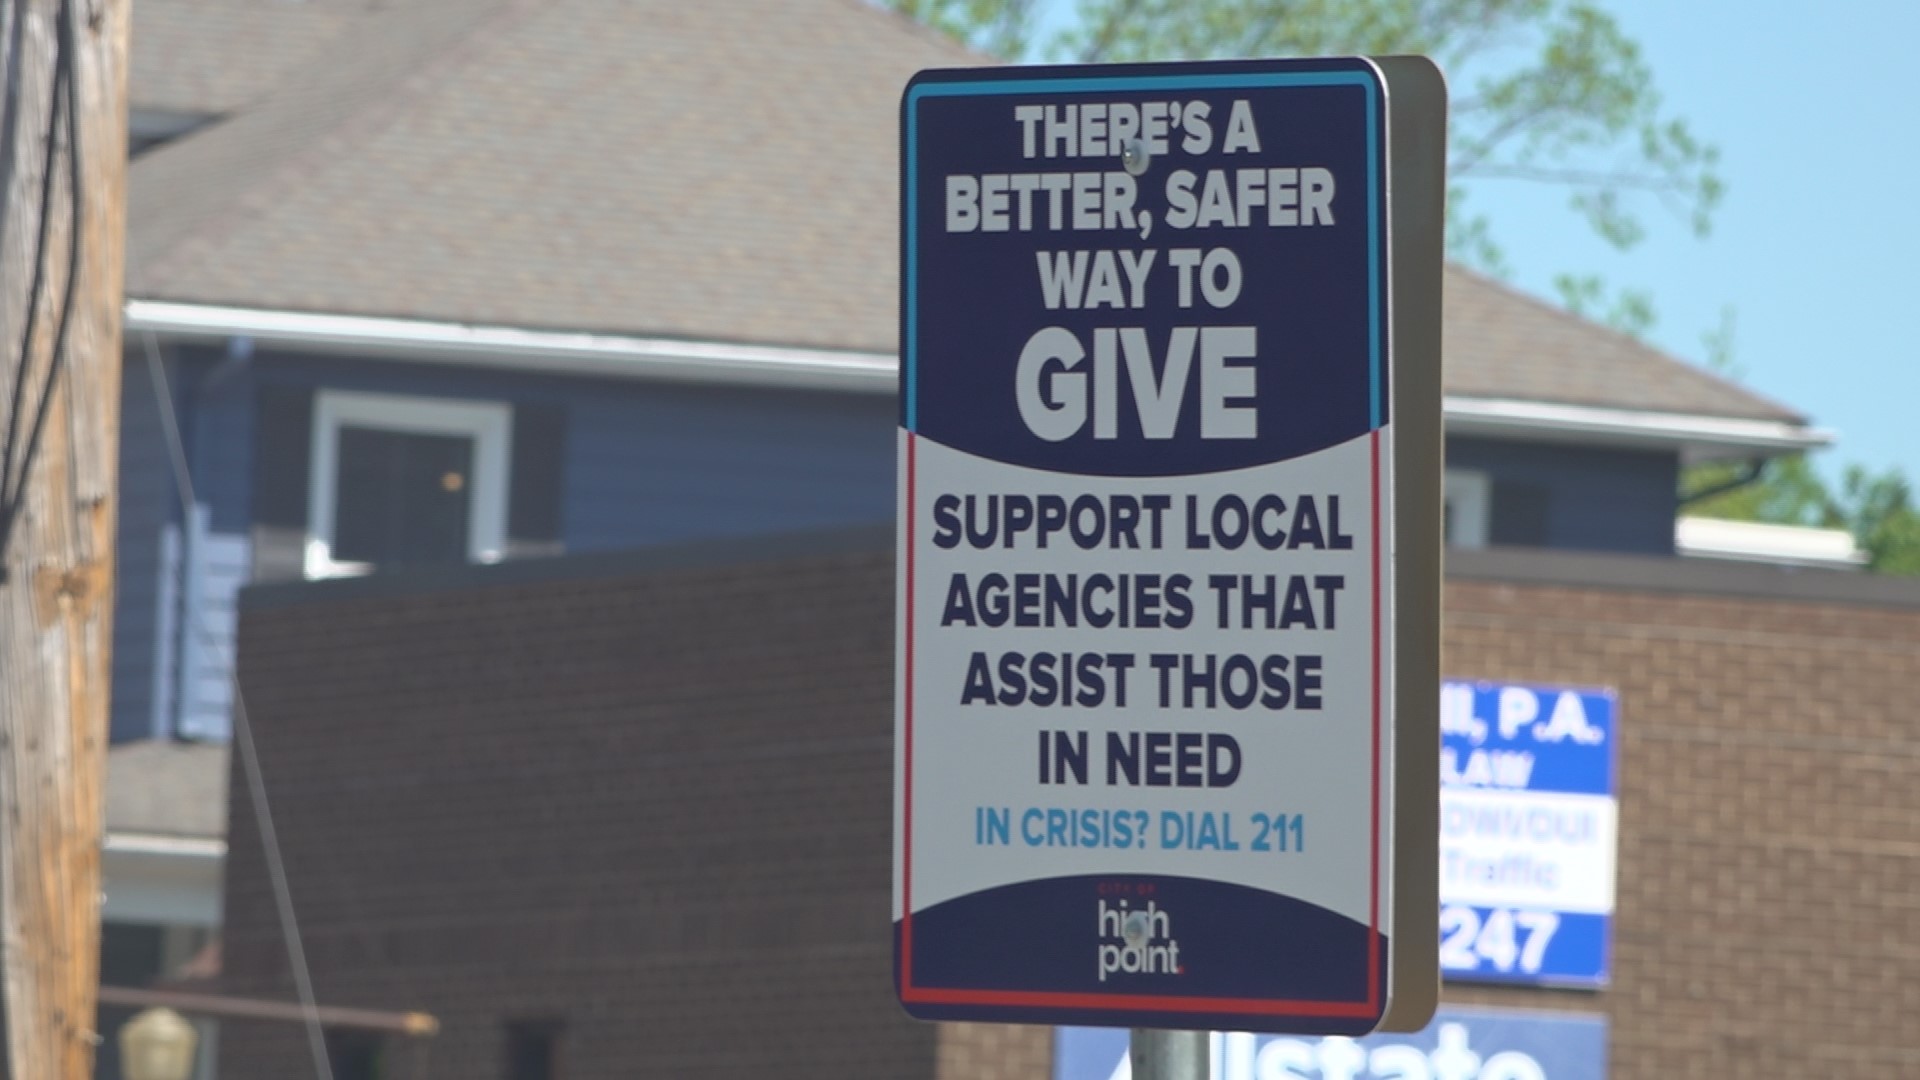 High Point encourages people to give through Triad agencies.